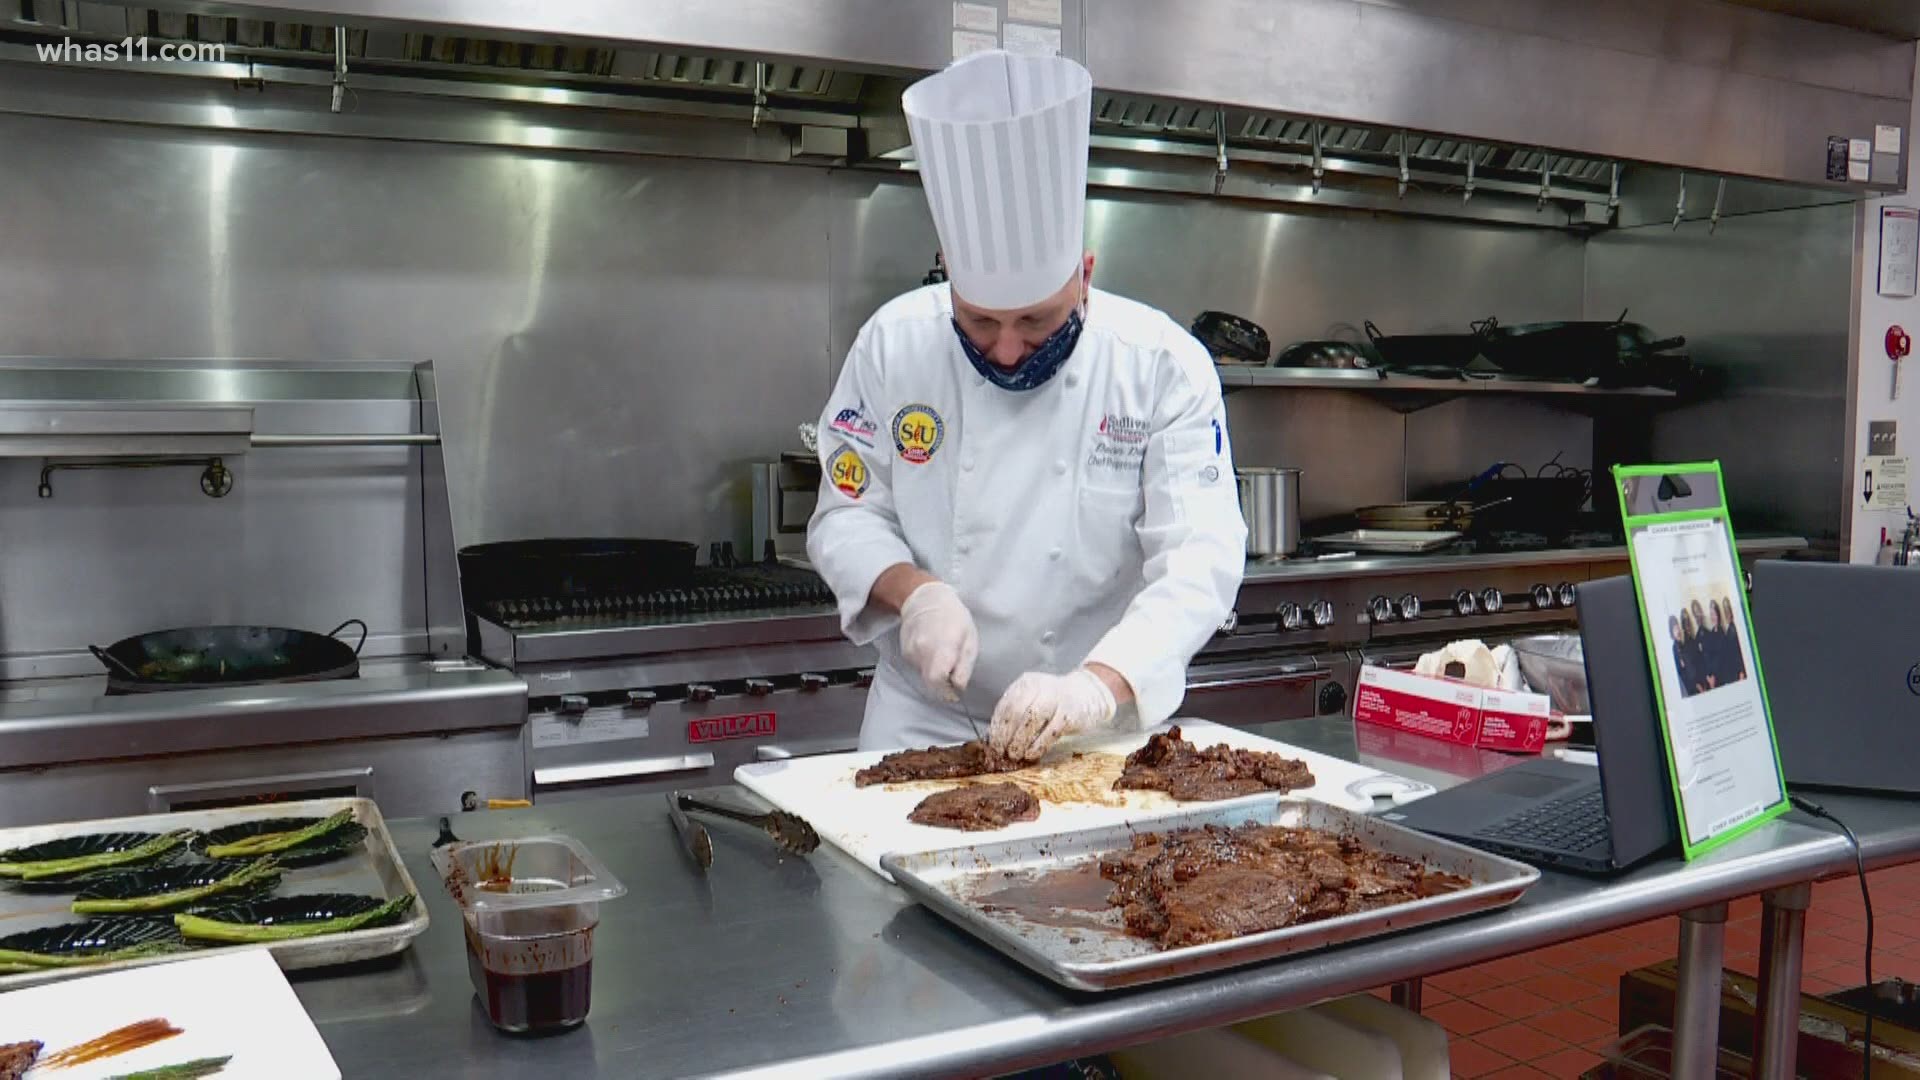 Chef Dean is one of five chefs working at Sullivan University for the NASA Culinary Challenge.